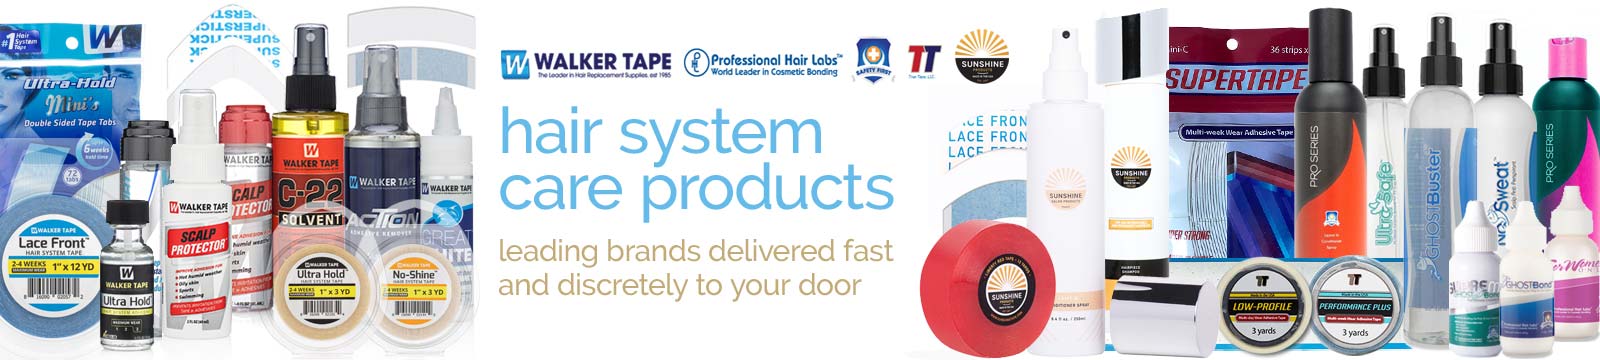 Holistique Banner - hair system products from Walker Tape, True Tape, Pro Hair Labs and Sunshine Tape USA.